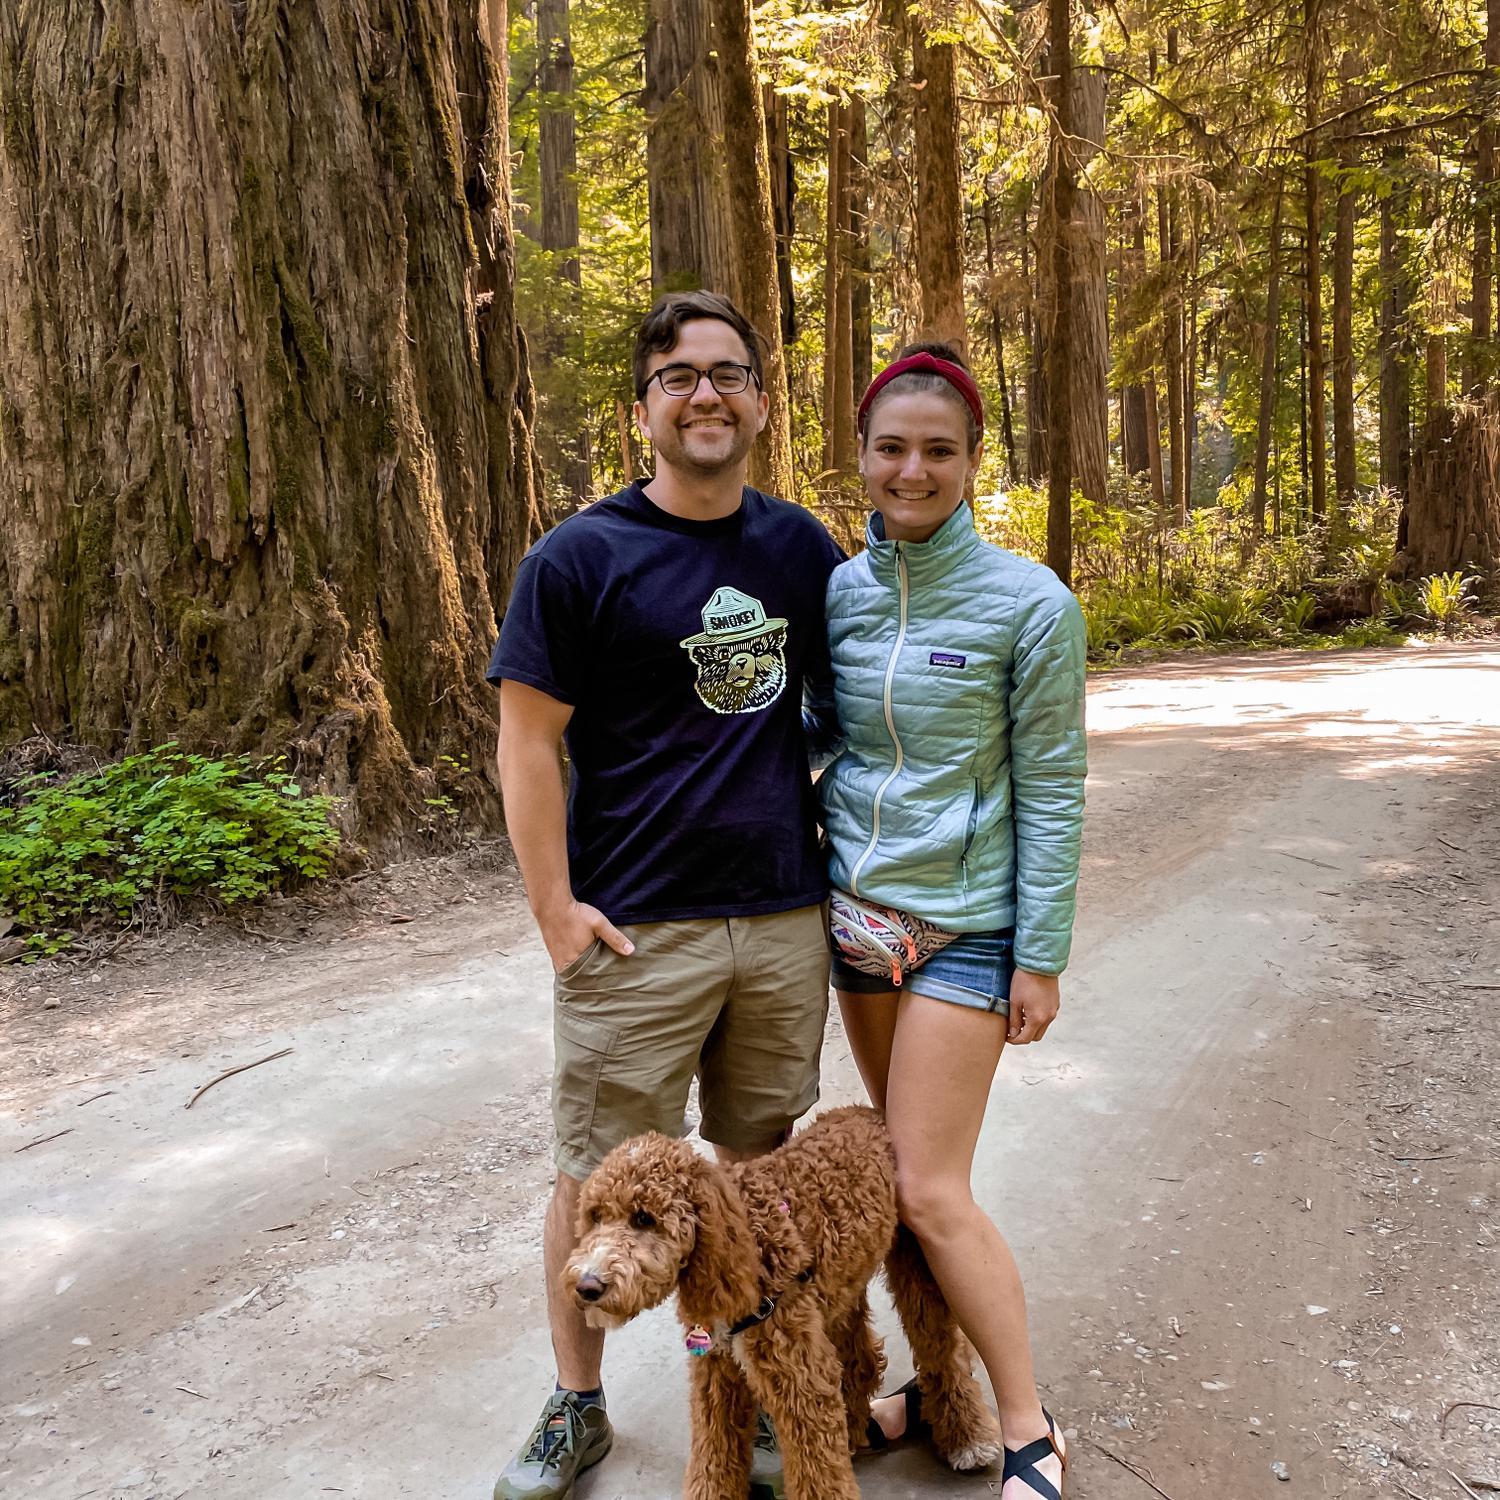 California Redwoods, engagement trip (Tessa still didn't know the ring was hiding in the jeep), 2021